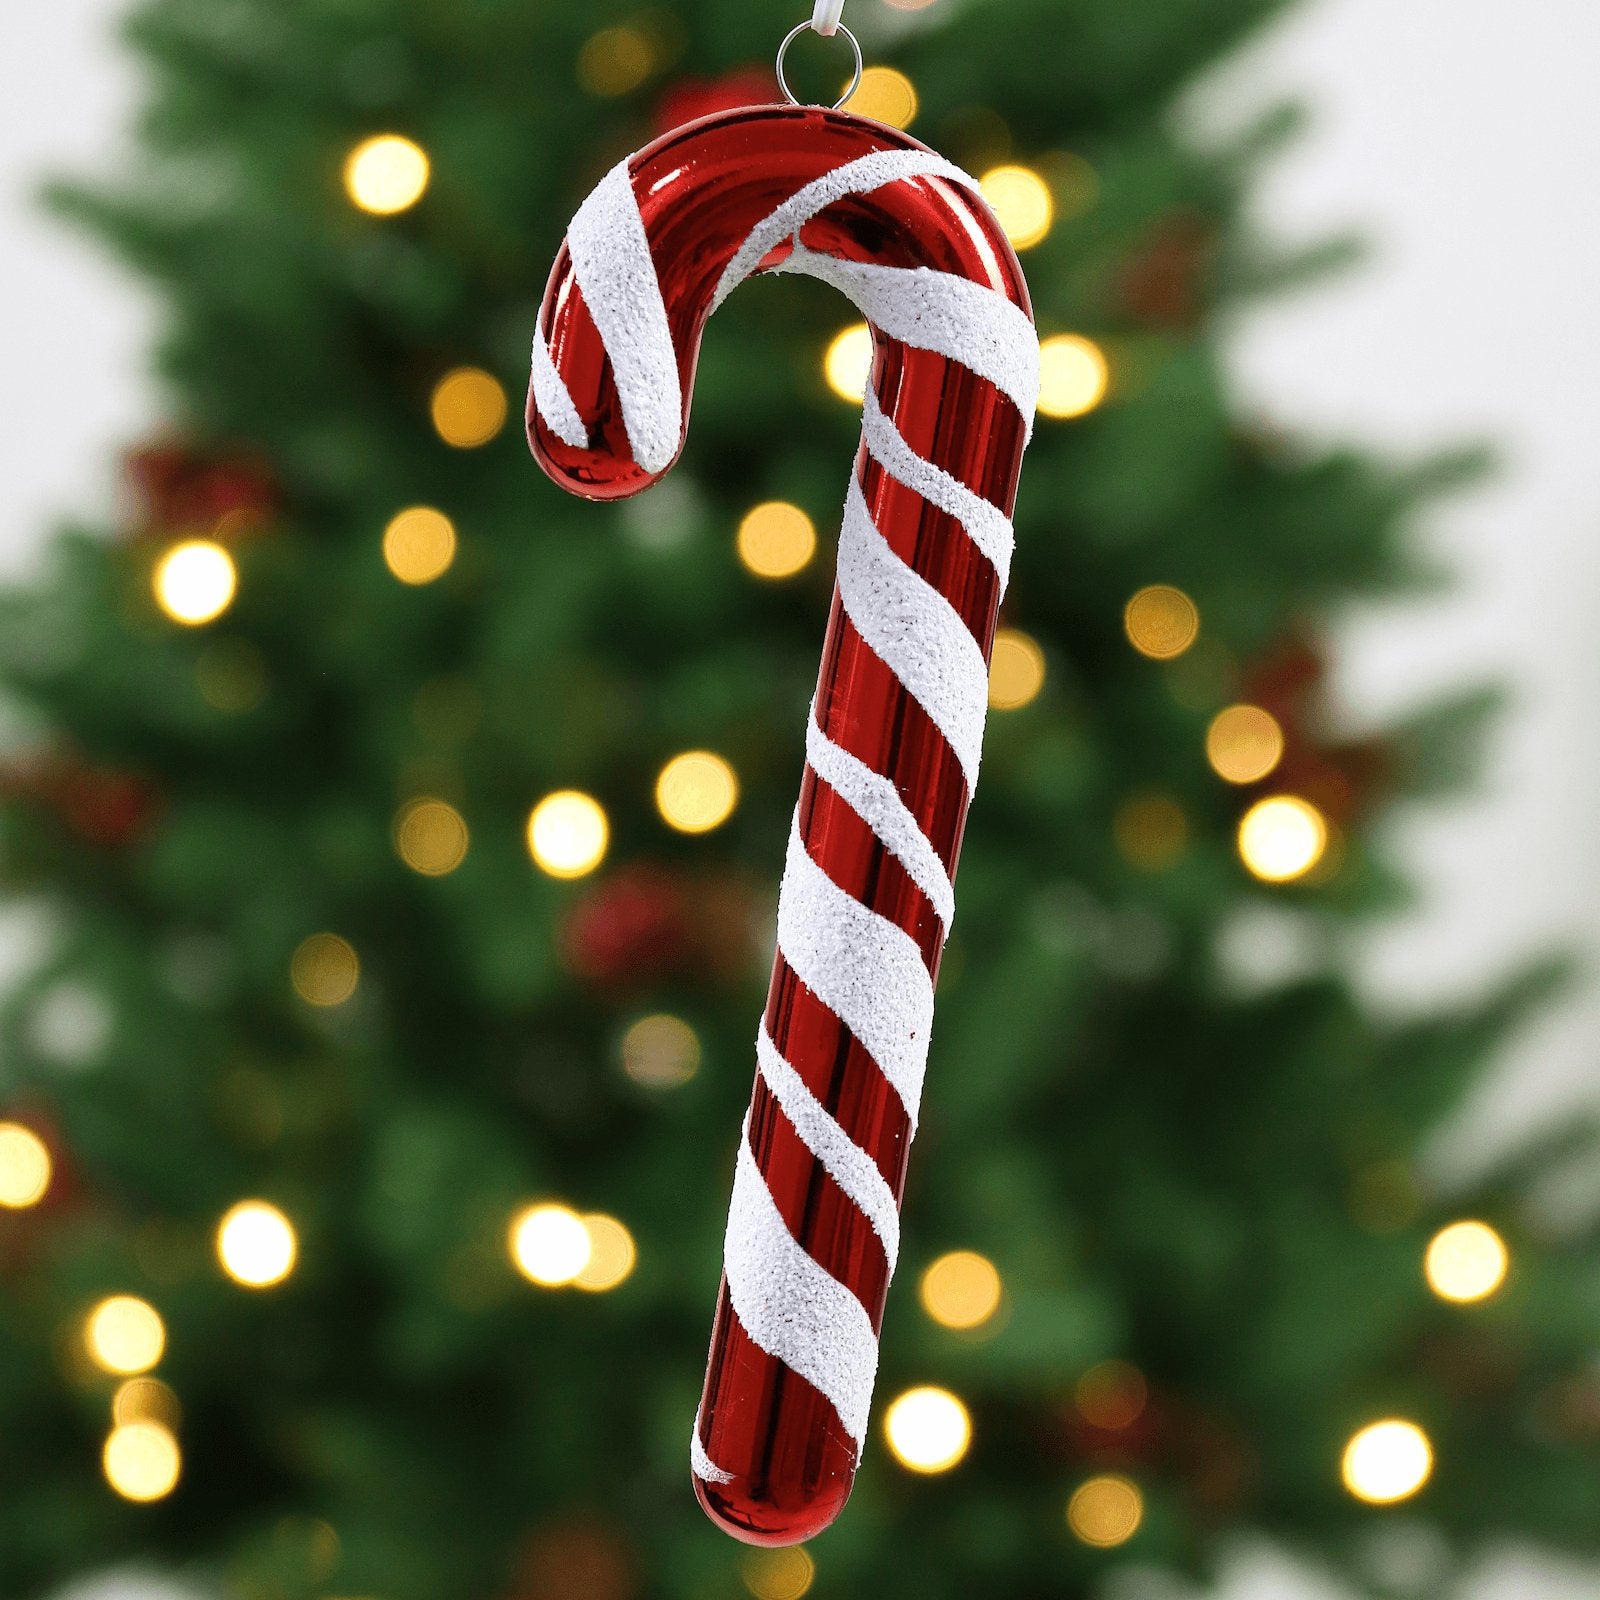 red glossy candy cane decoration with white glitter stripes hanging in front of christmas tree with warm white led lights